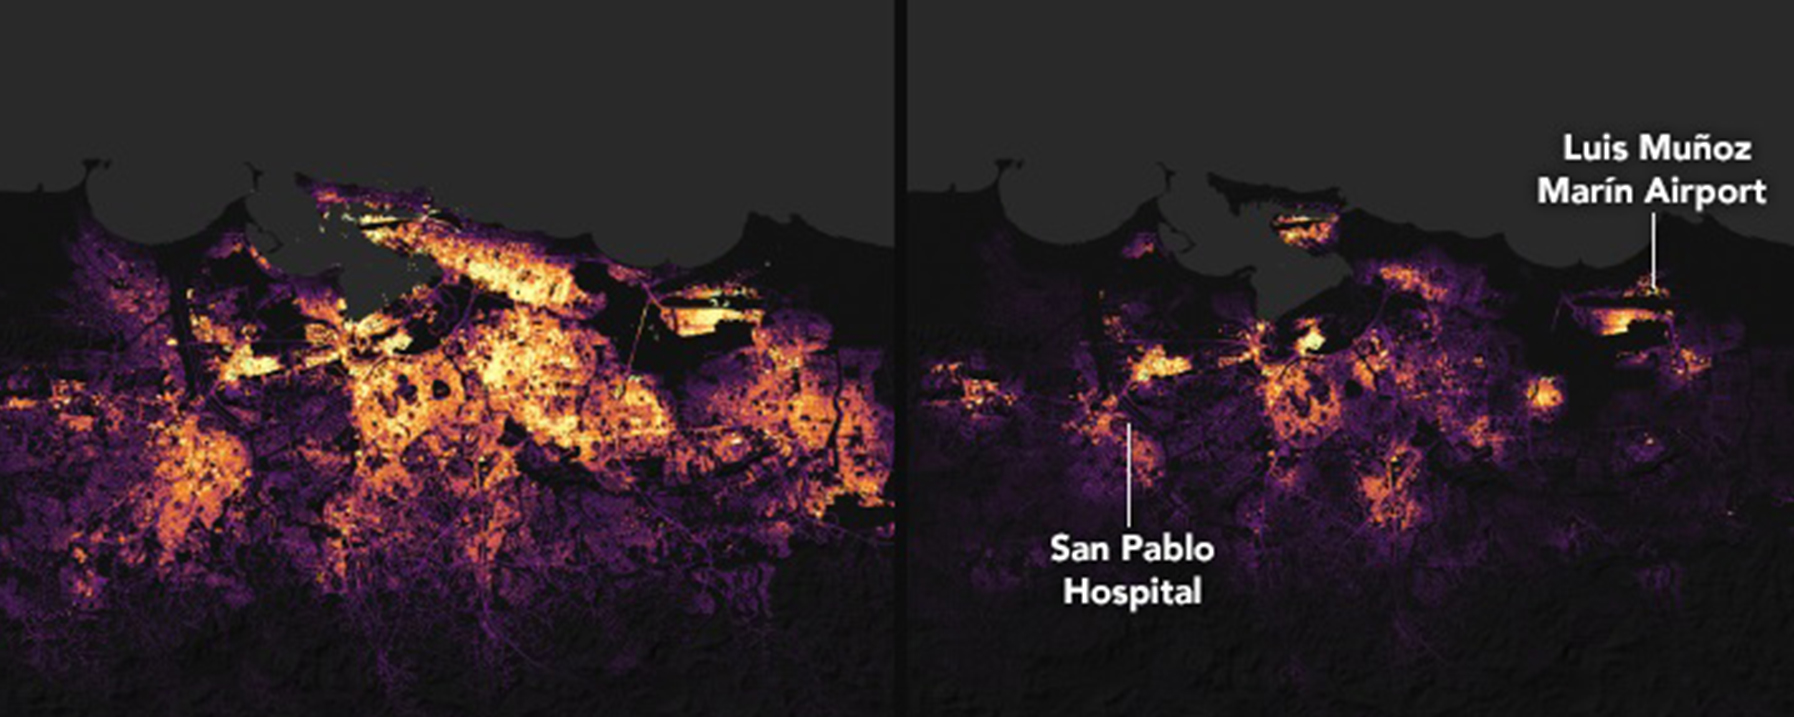 Puerto Rico Lights Before and After Hurricane